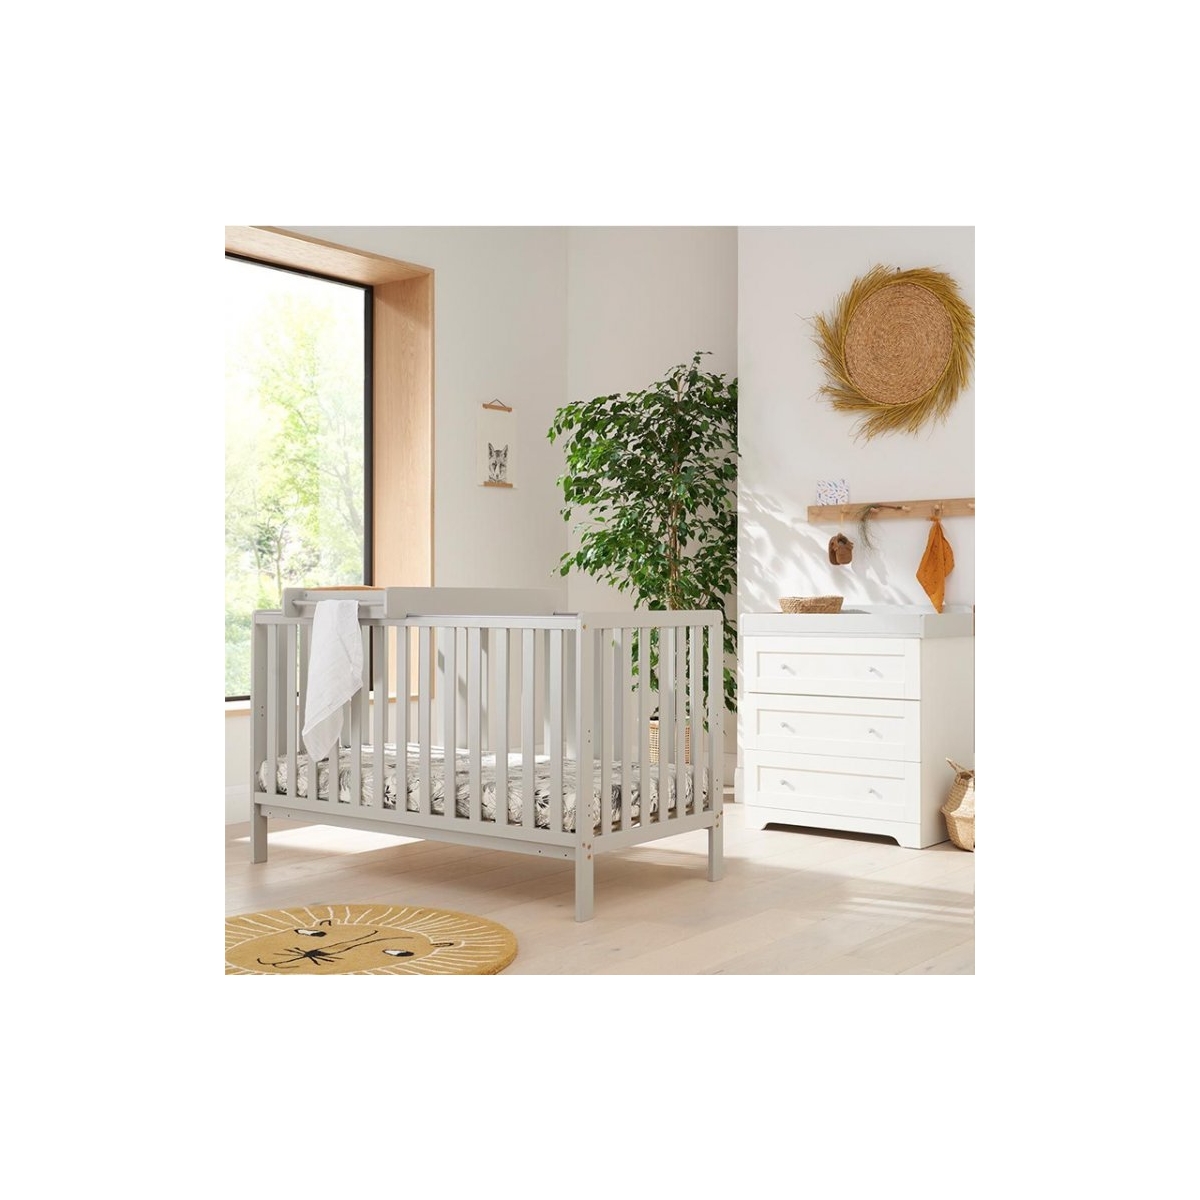 Tutti Bambini Malmo 2 Piece Room Set with Cot Top Changer